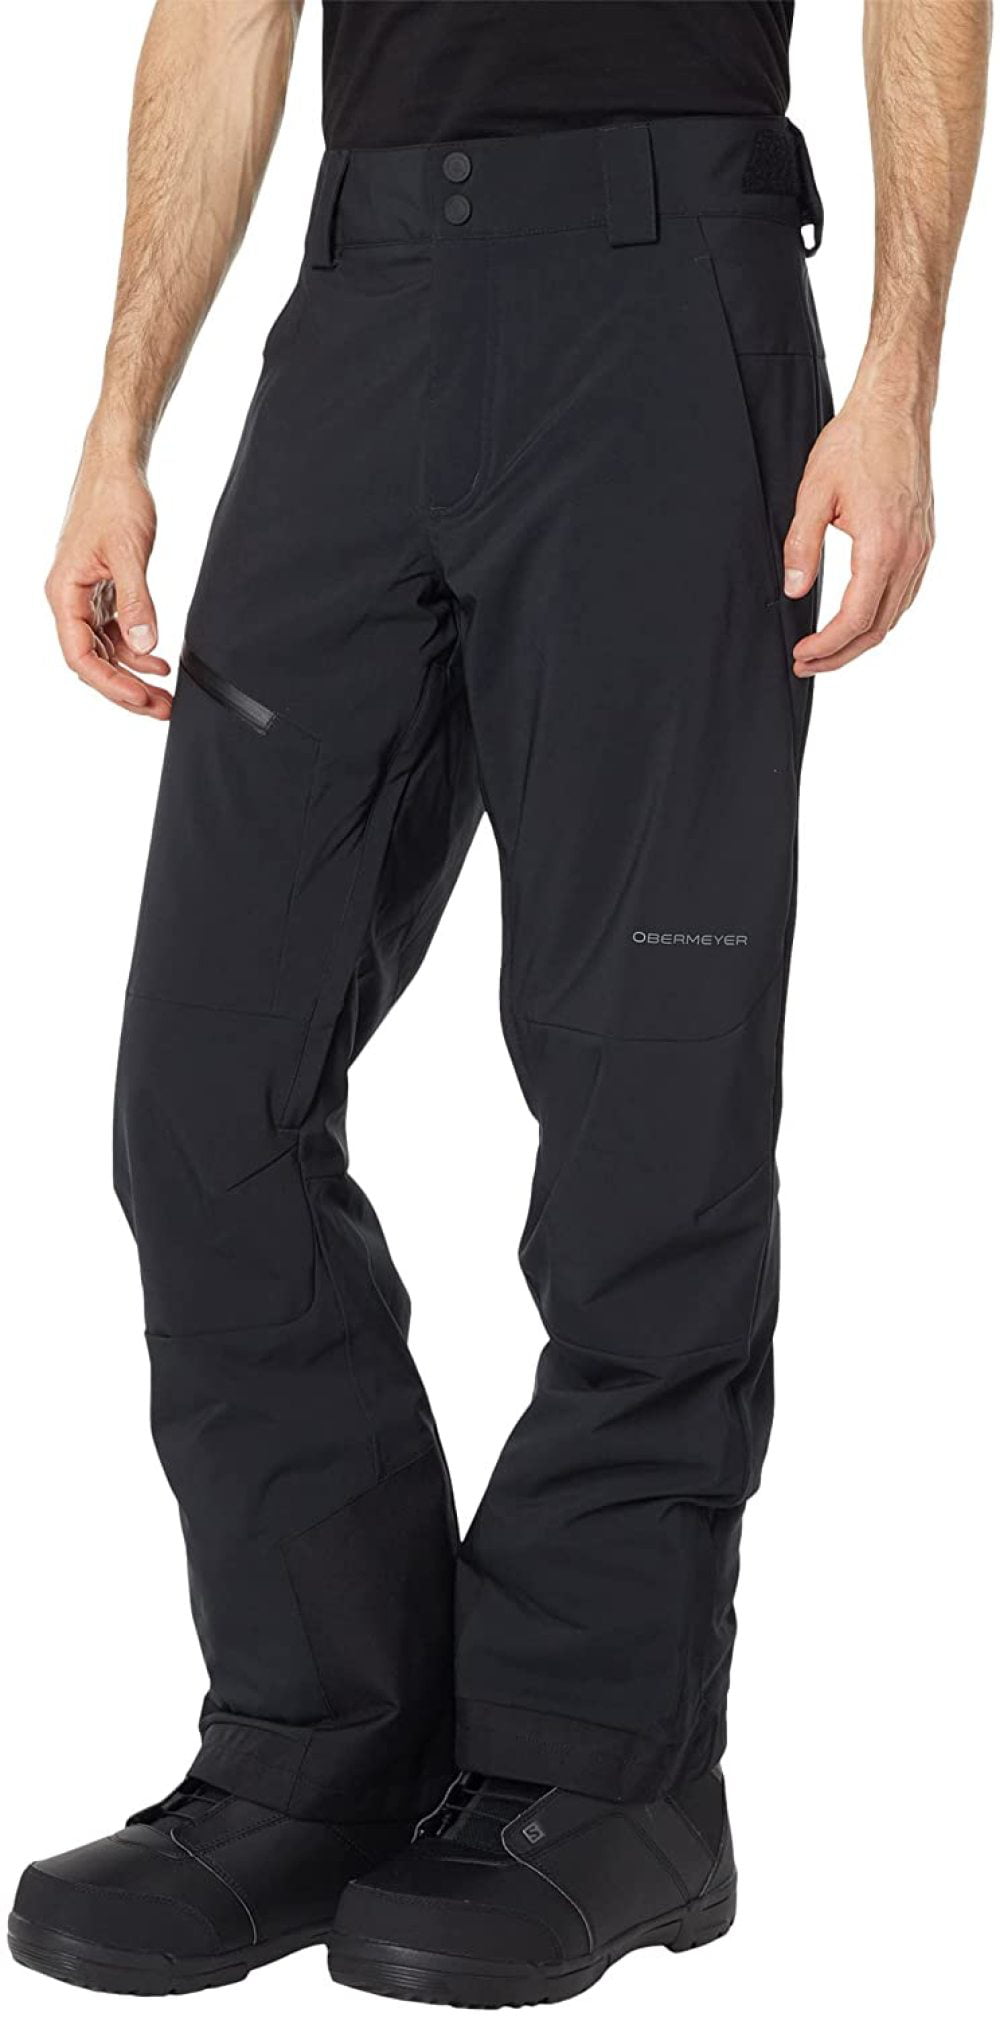 Details about   $49.99 Slalom Youth Ski/Snow Pants New With Tags Black Size XS 